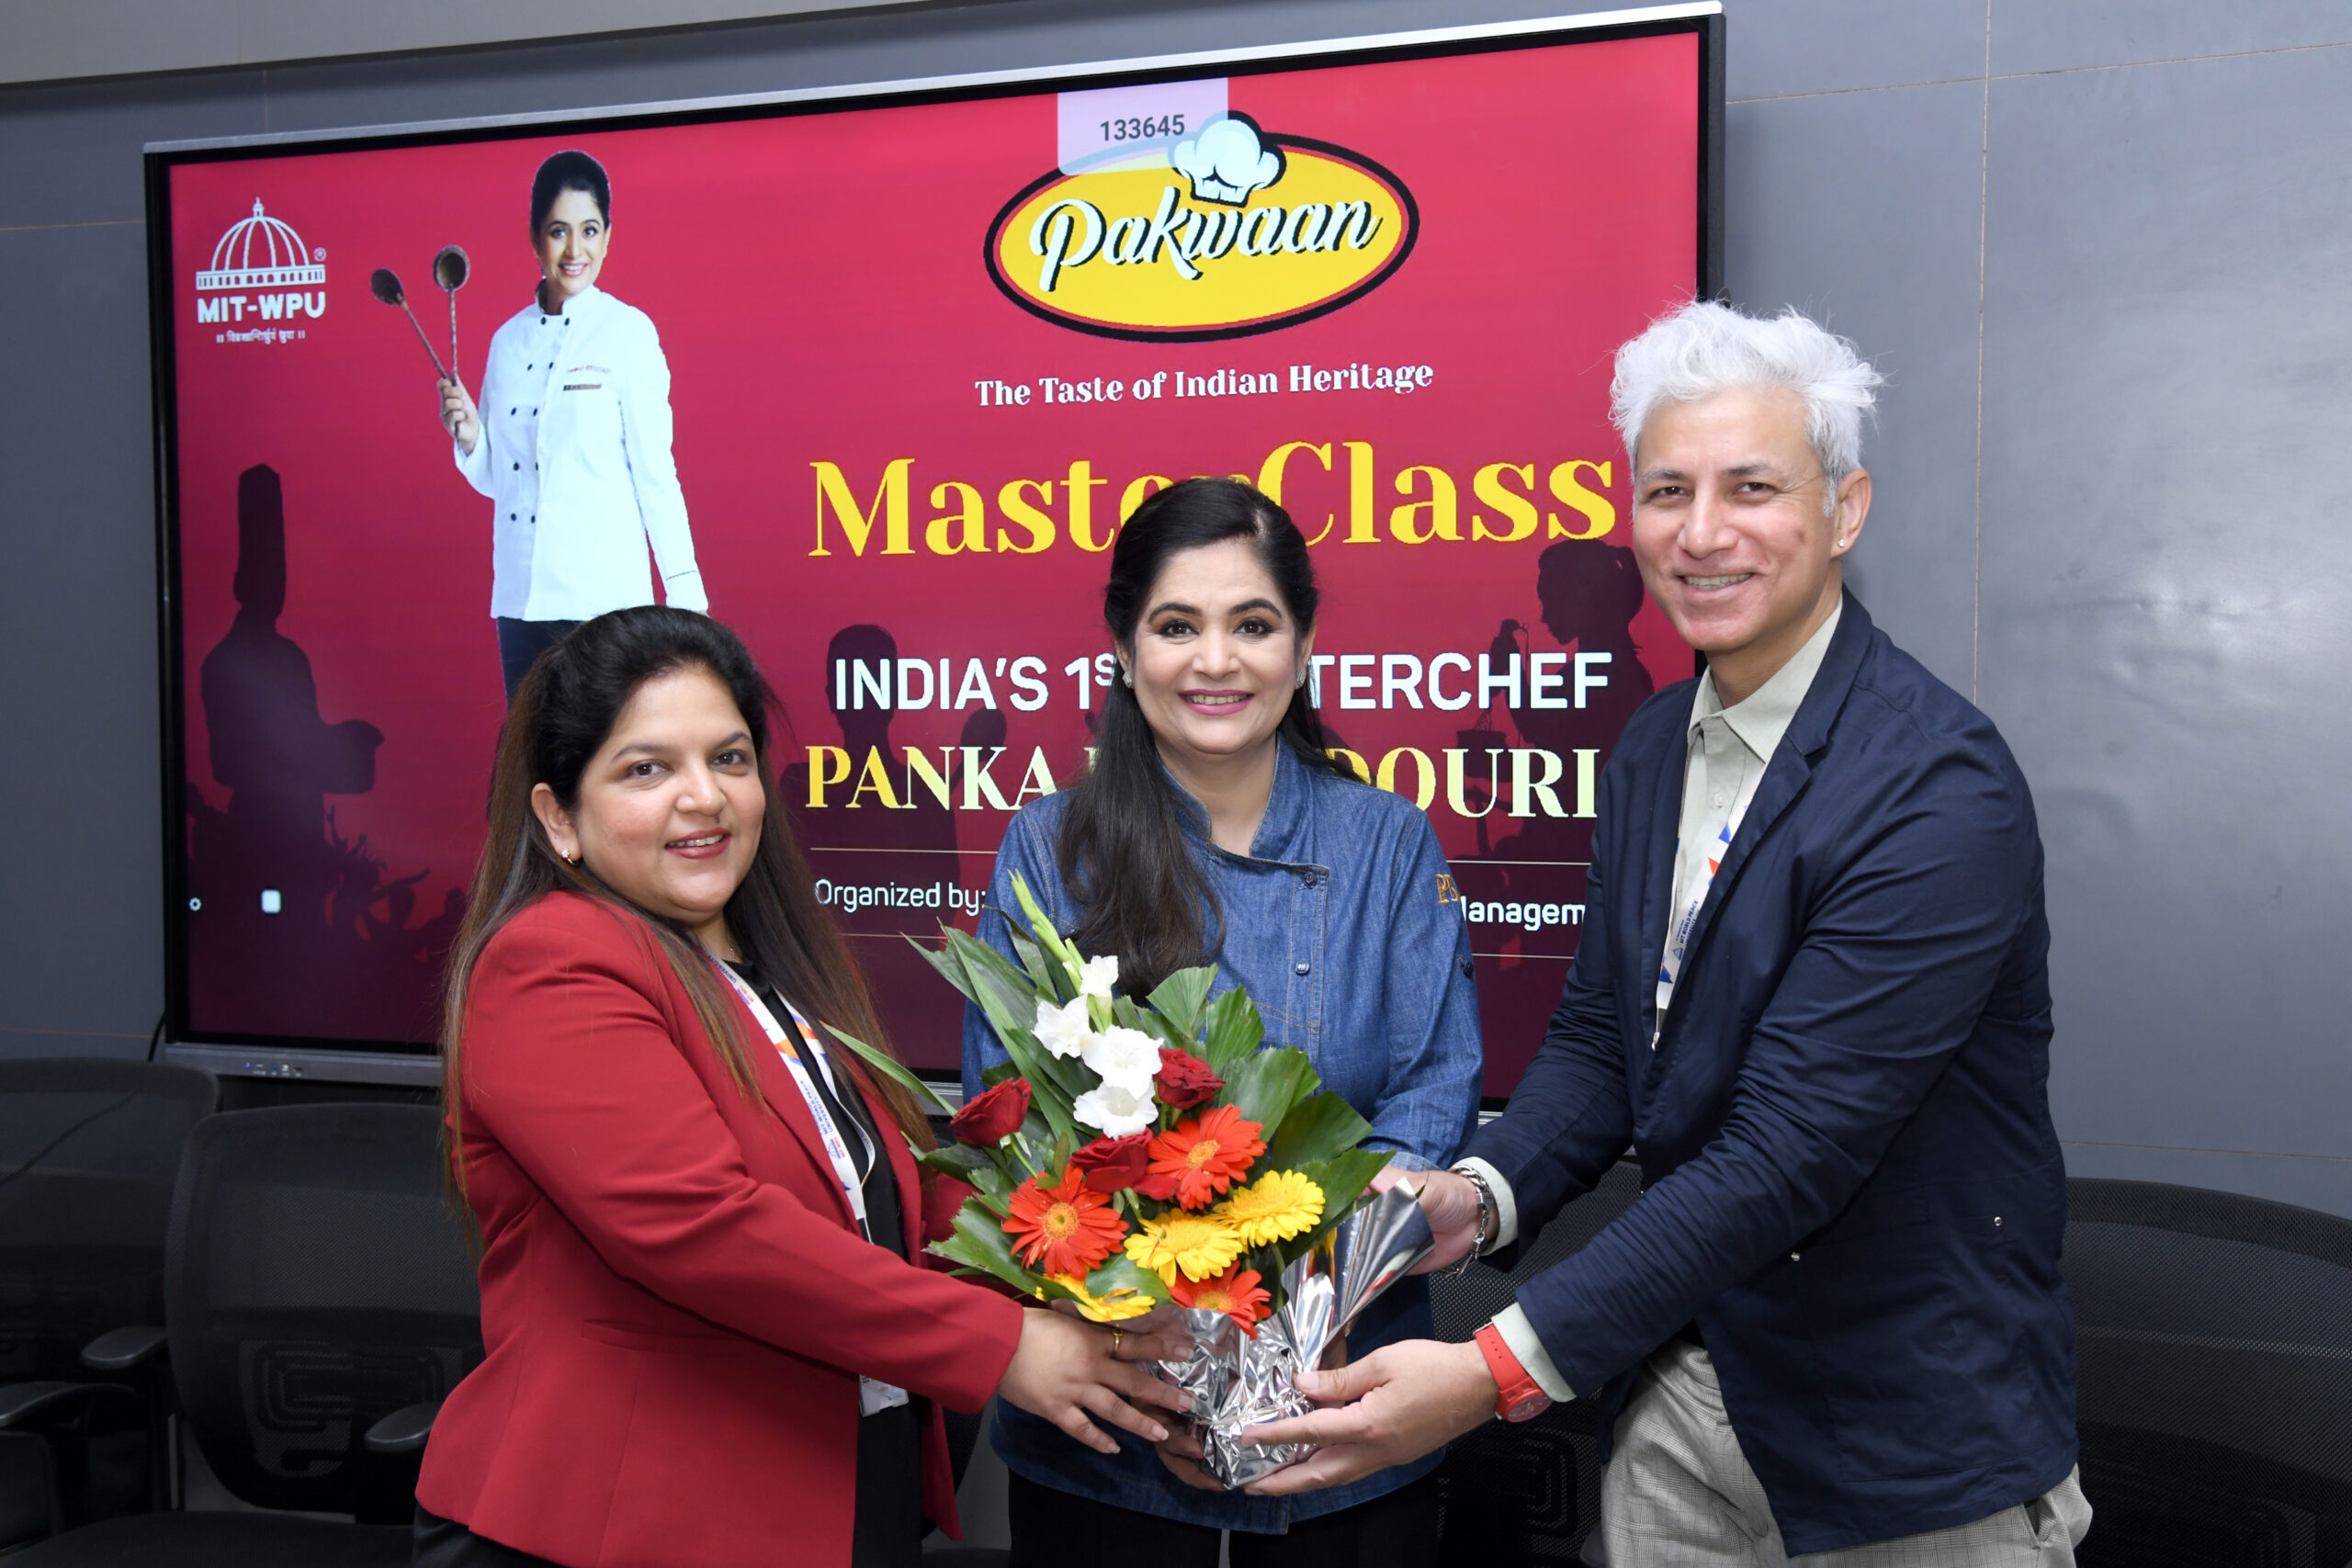 MIT-WPU Department of Hospitality Management organized Pakwaan, The Taste of Indian Heritage—The Lost Recipe Contest